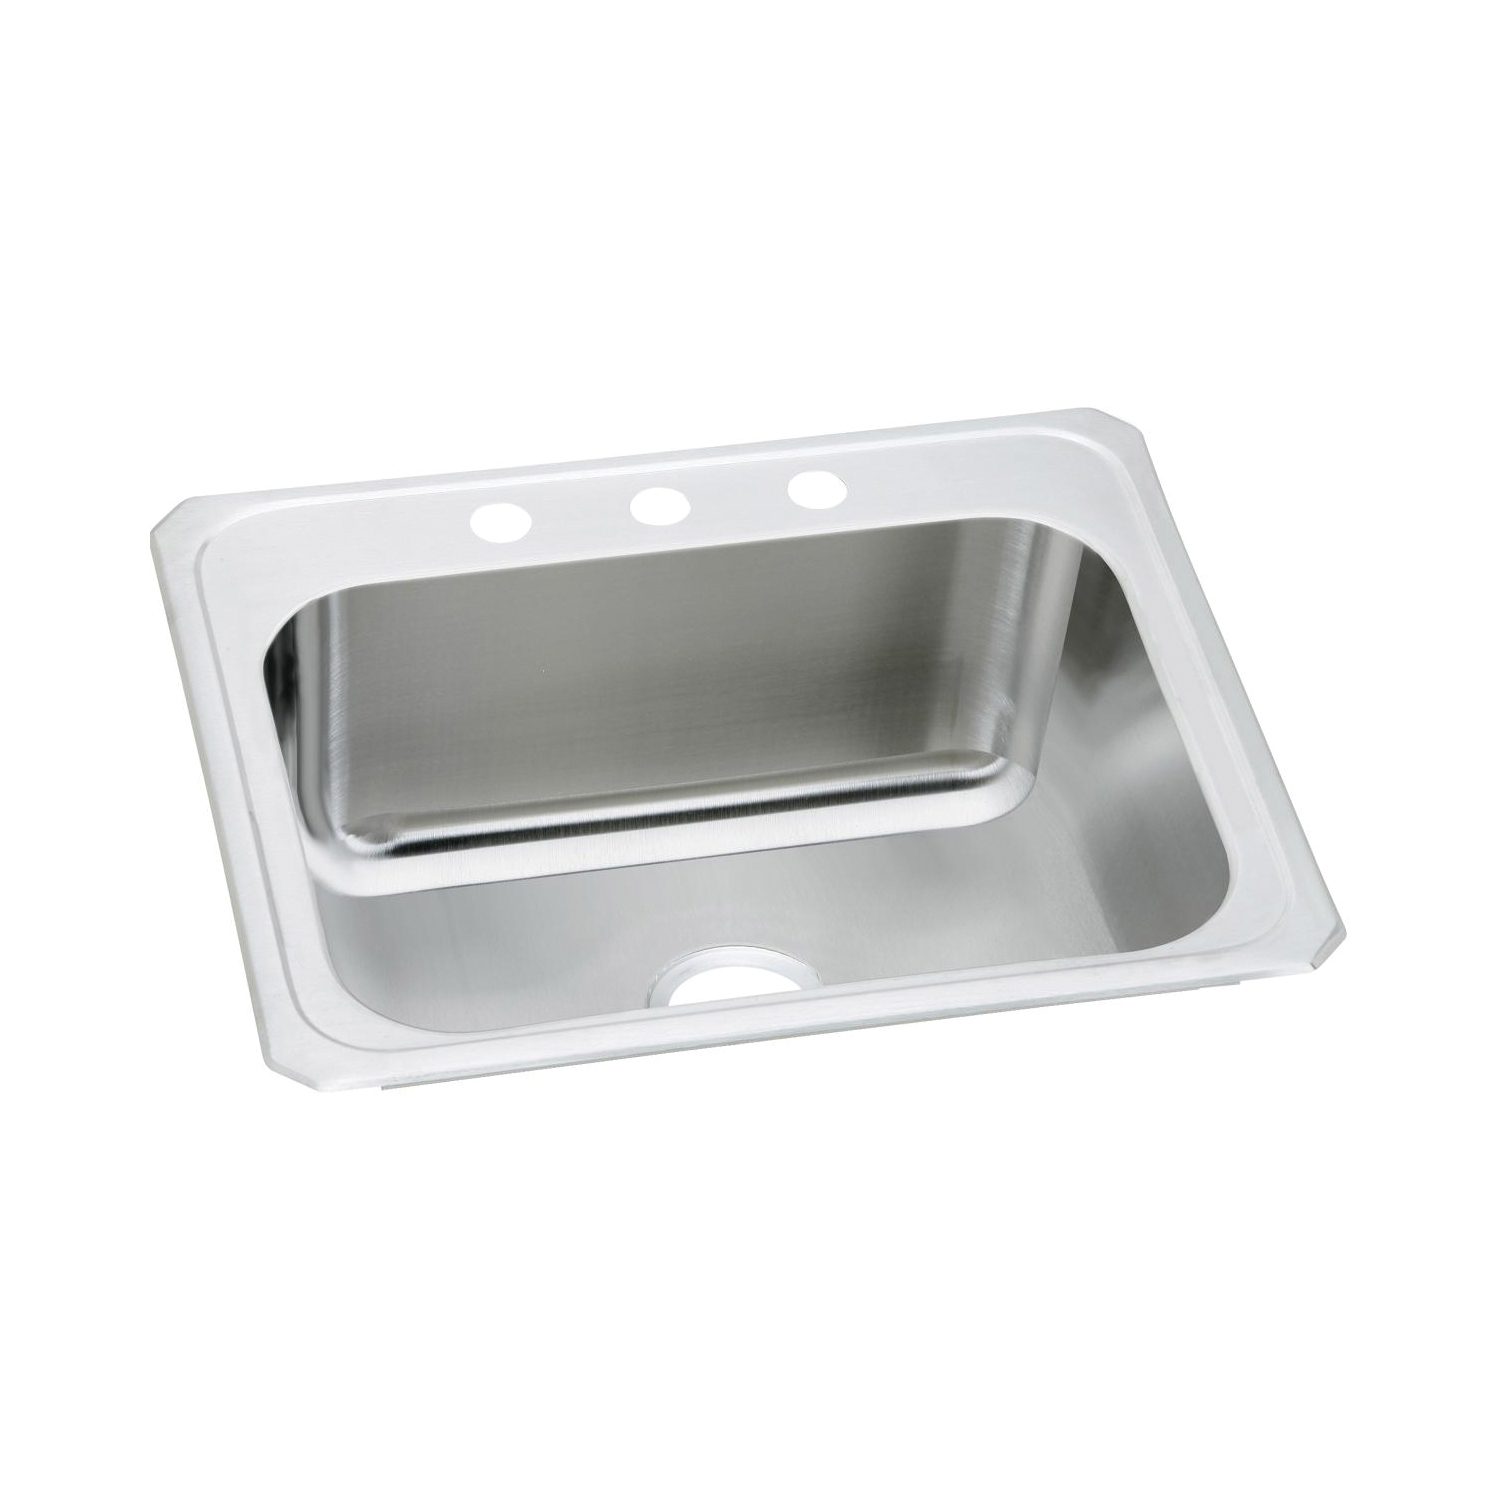 Elkay® DCR2522101 Pursuit™ Laundry Sink, Rectangular, 25 in W x 10-1/4 in D x 22 in H, Top Mount, Stainless Steel, Brushed Satin, Domestic